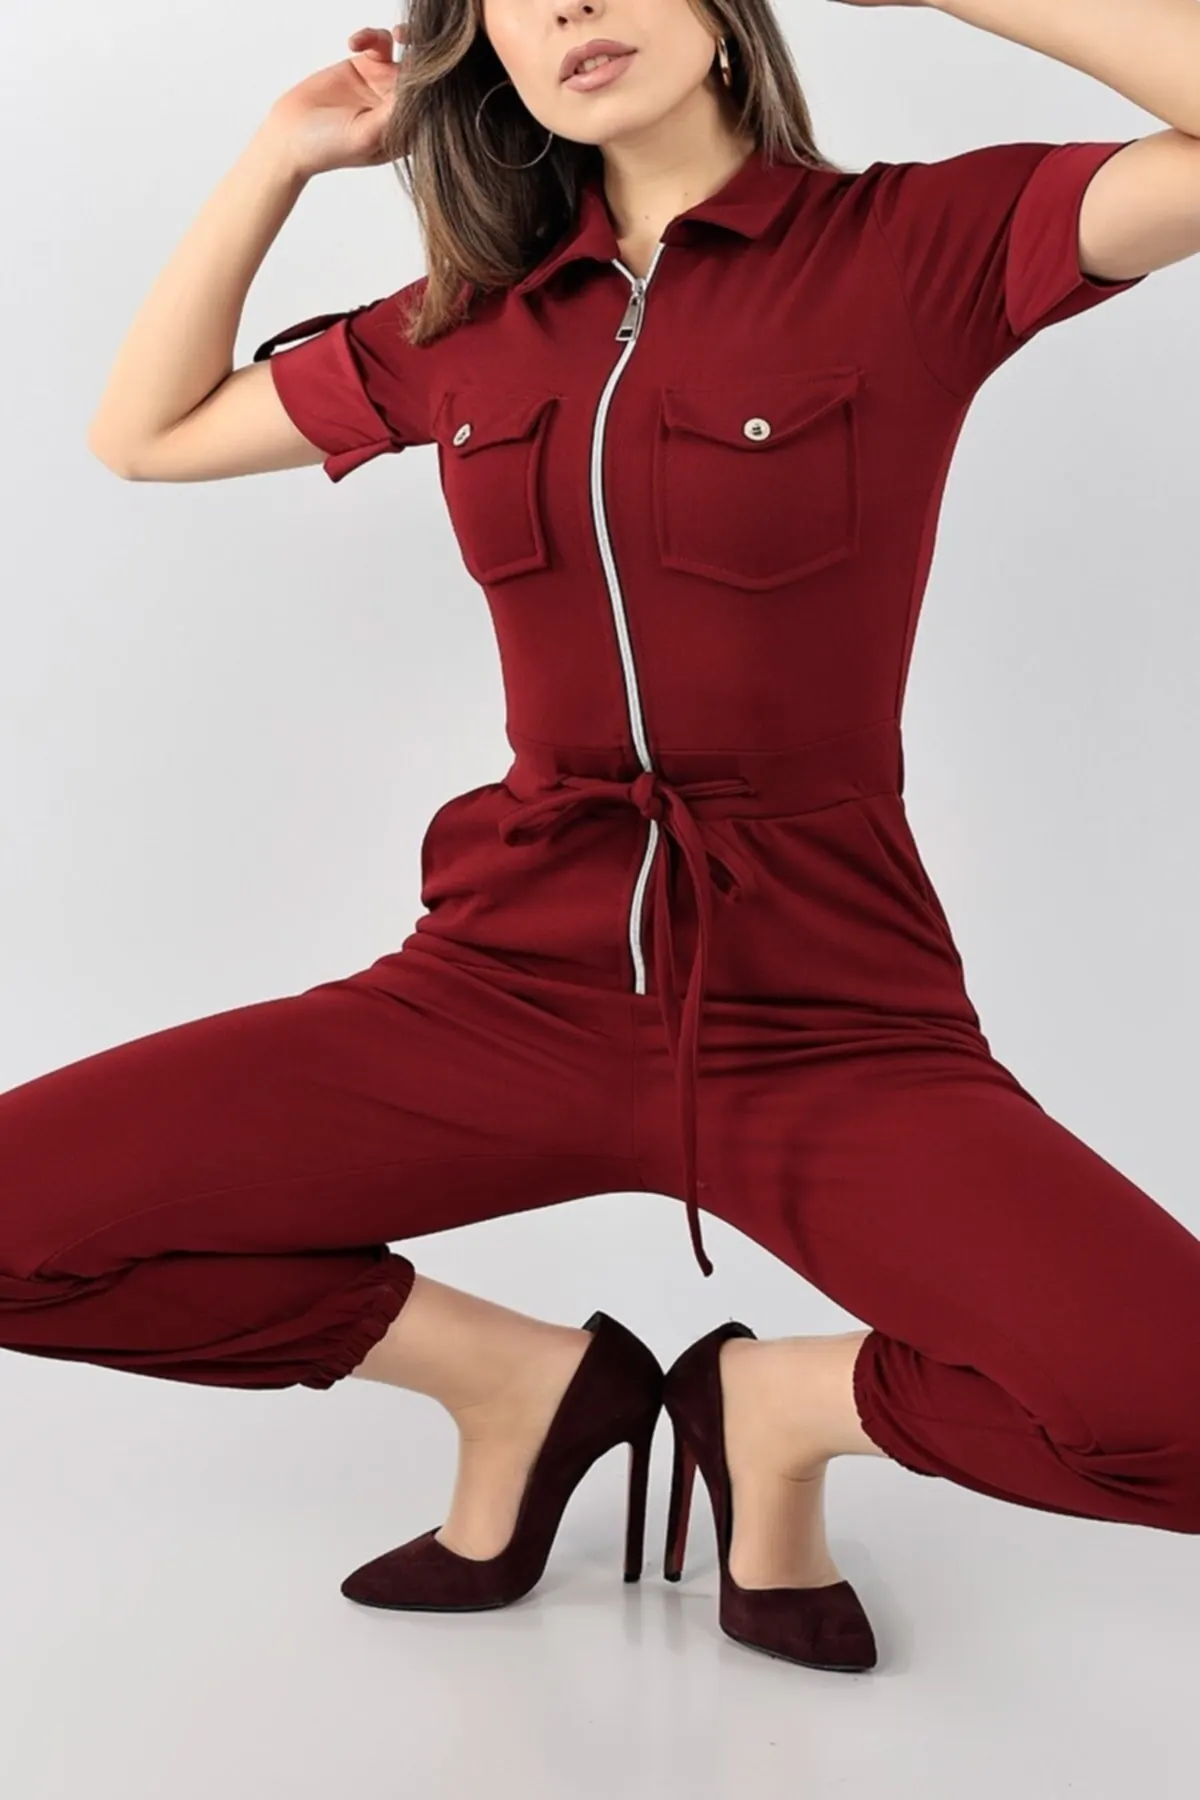 

Women's Overalls Claret Red Zippered Sleeve Tie Crepe Jumpsuit Hot Casual Fashion Sleeveless Baggy Trousers